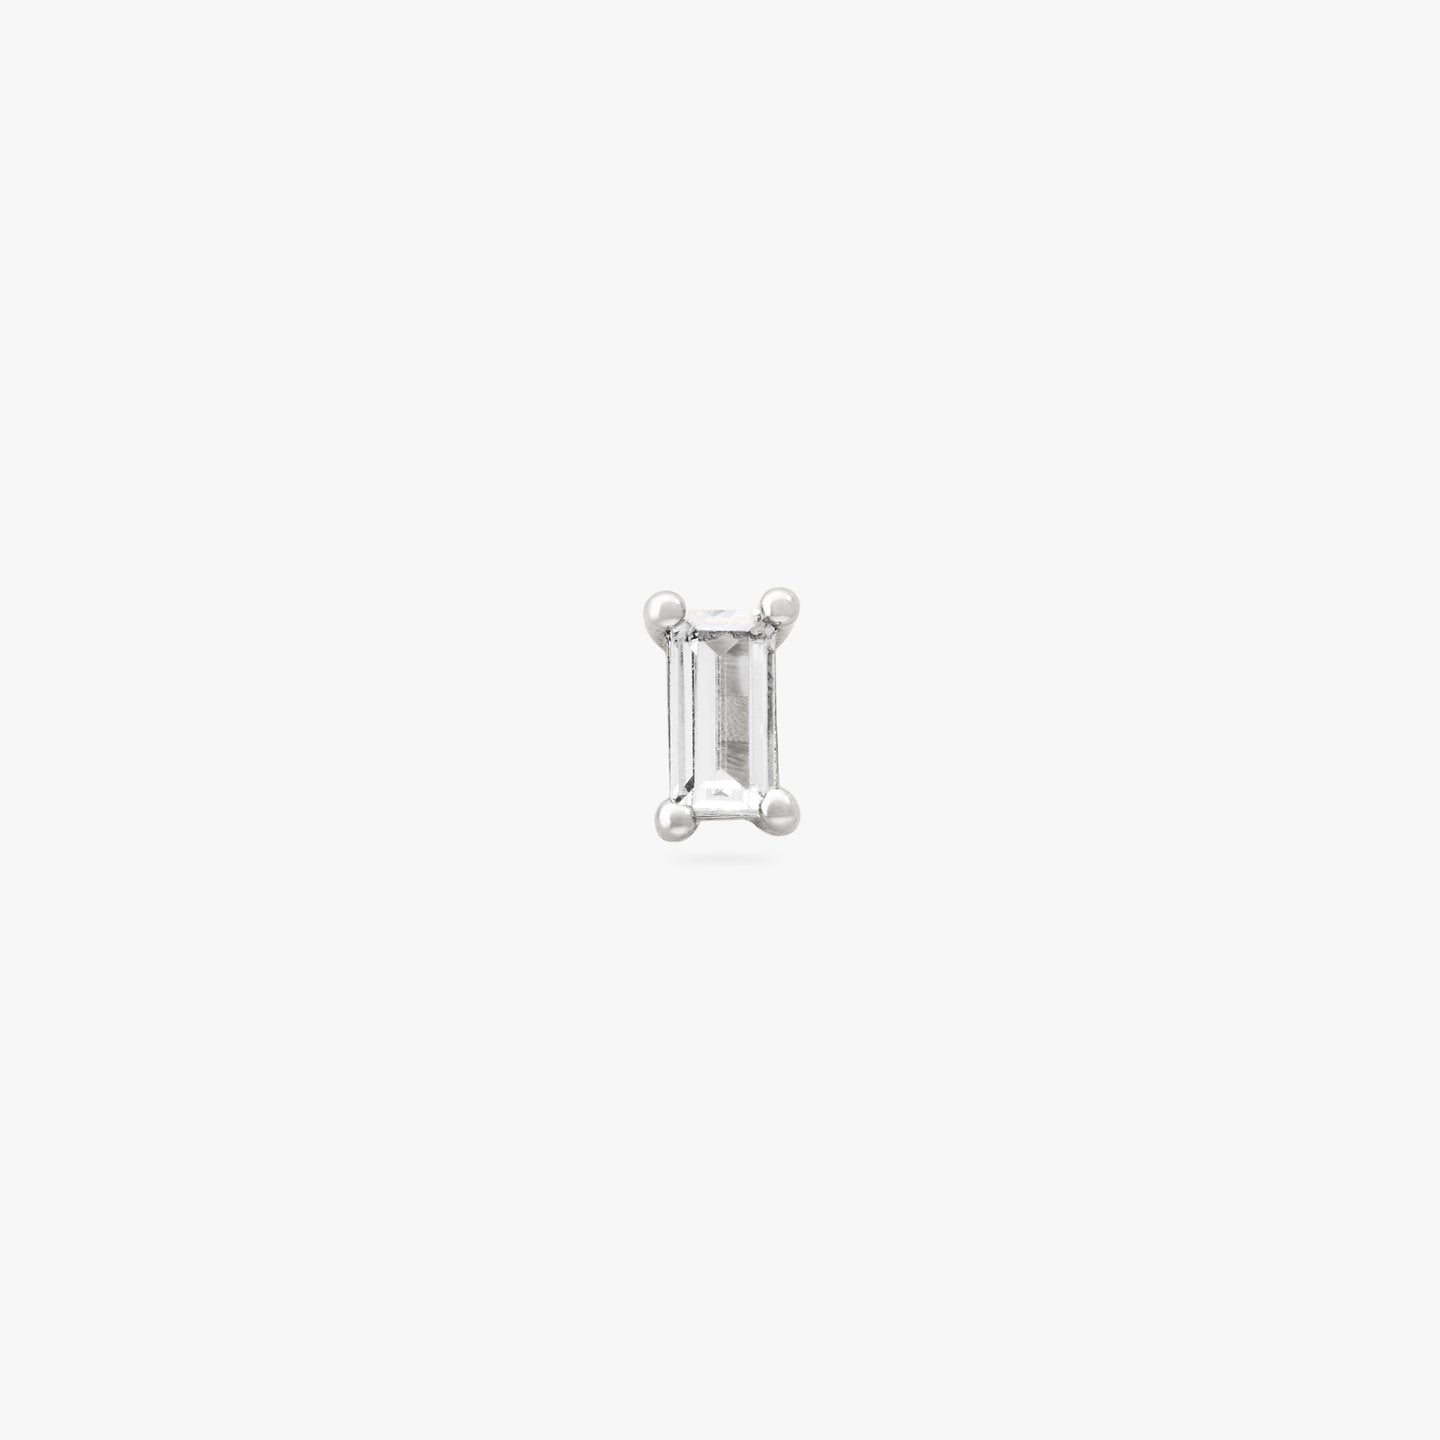 This is a silver baguette stud with a clear CZ gem color:null|silver/clear